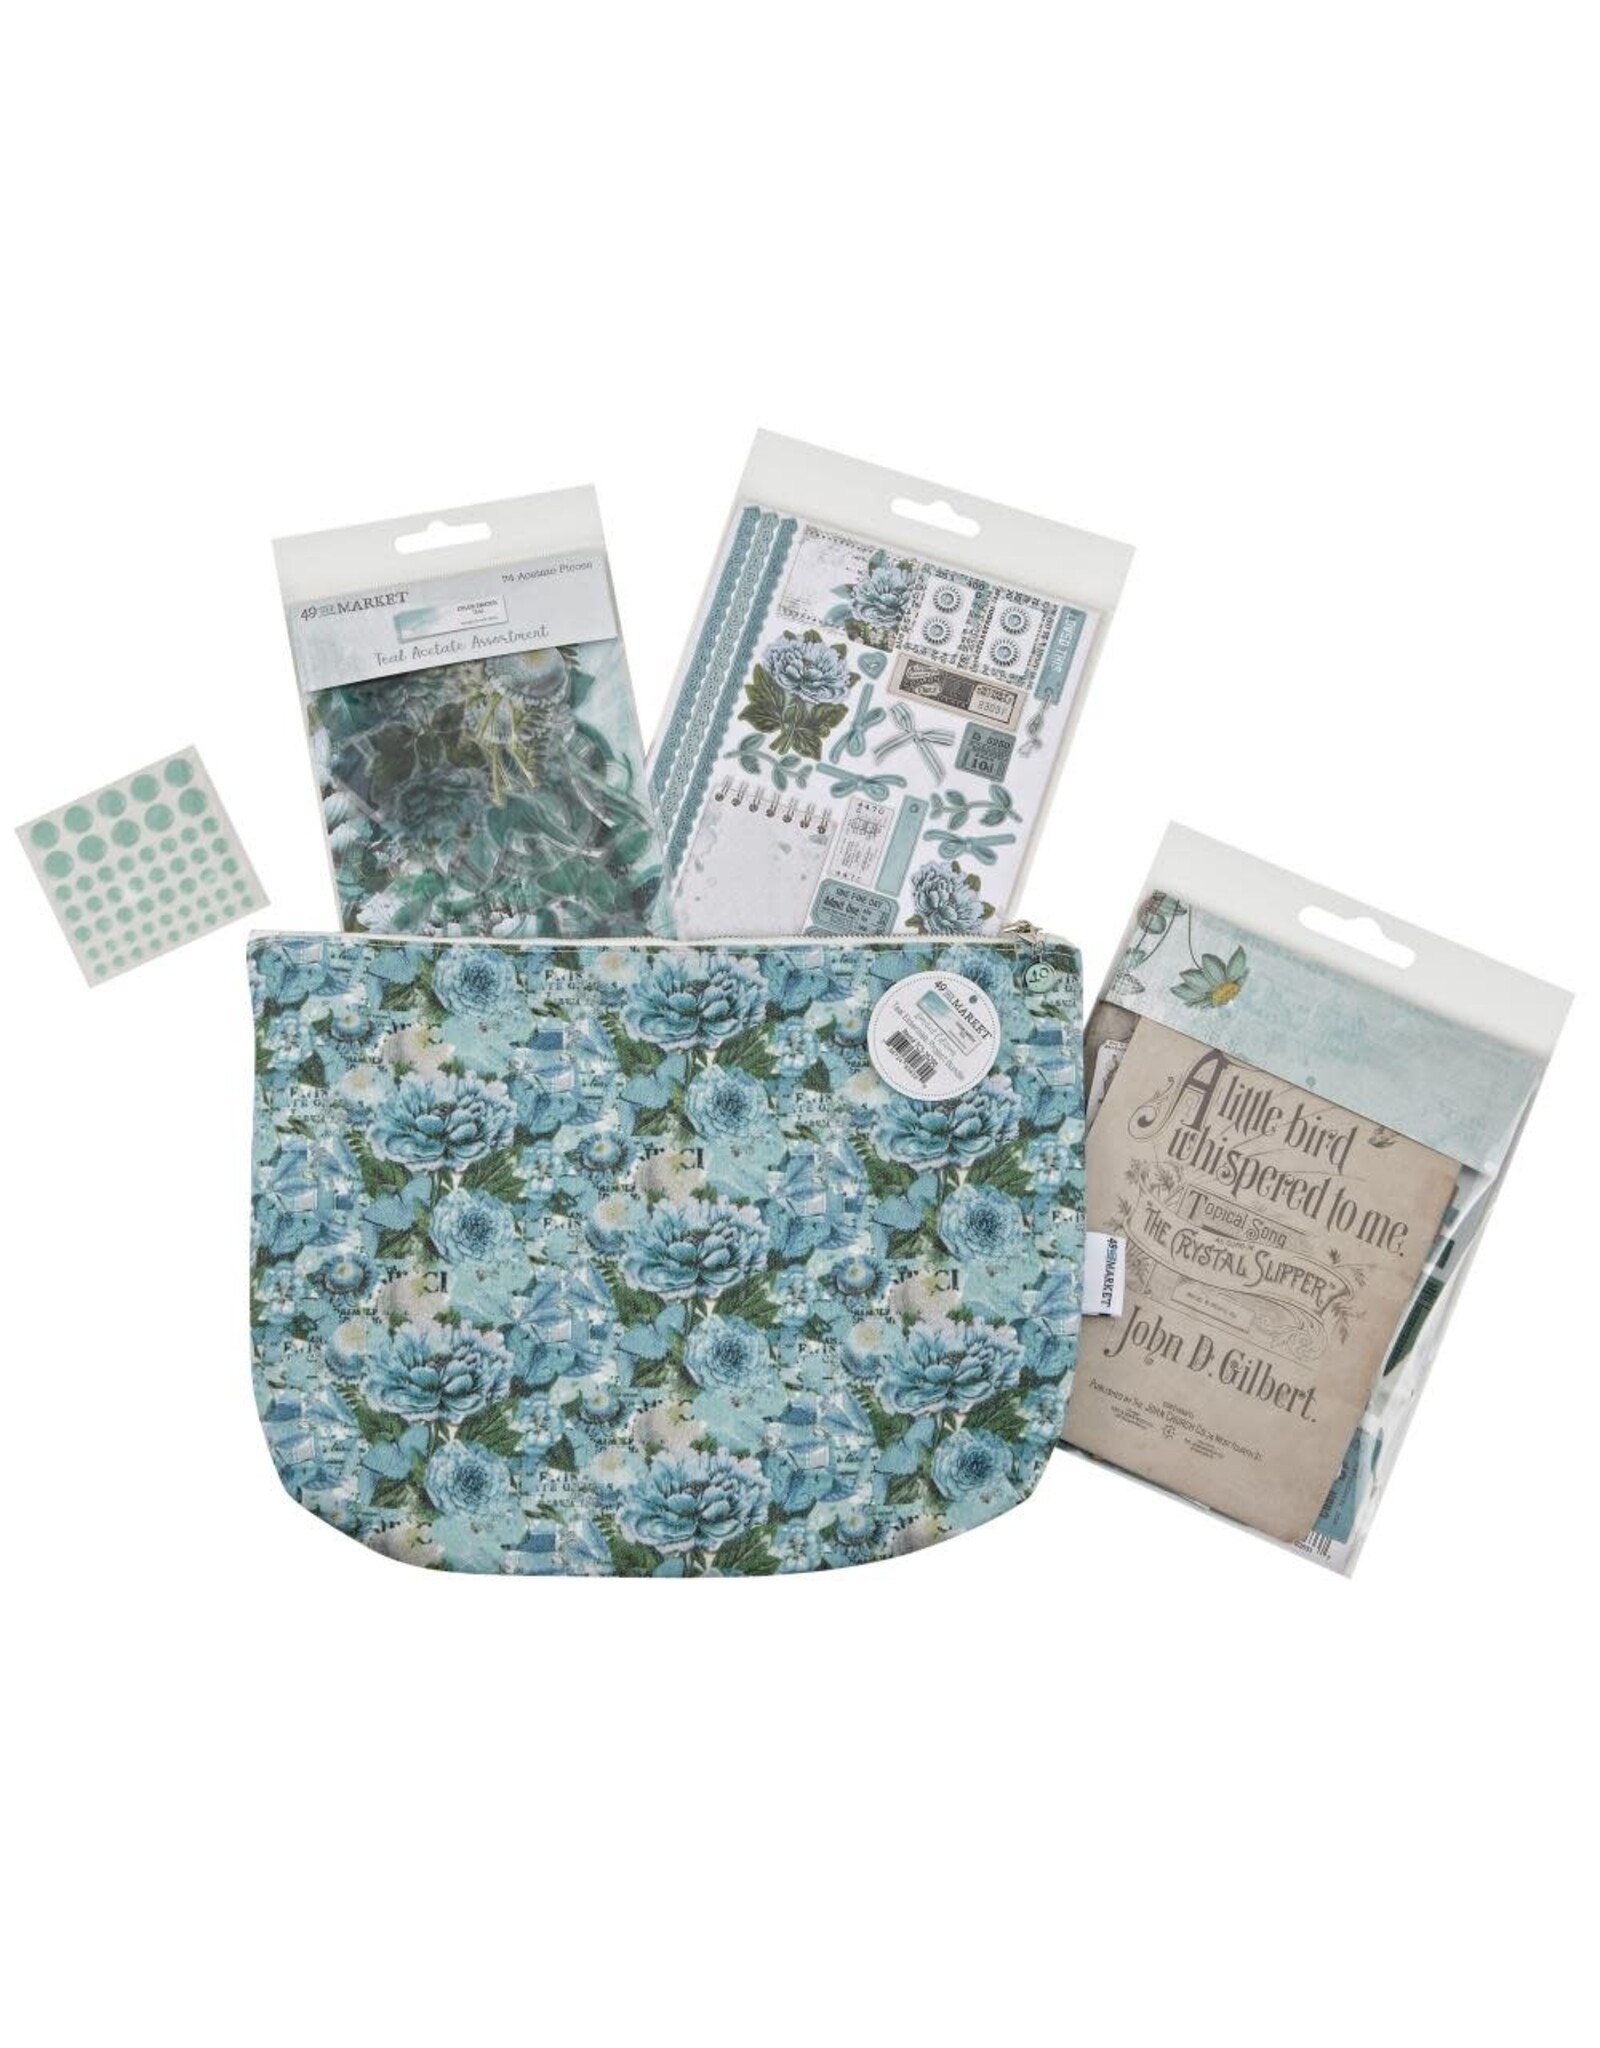 49 AND MARKET 49 AND MARKET COLOR SWATCH TEAL ESSENTIALS PROJECT BUNDLE